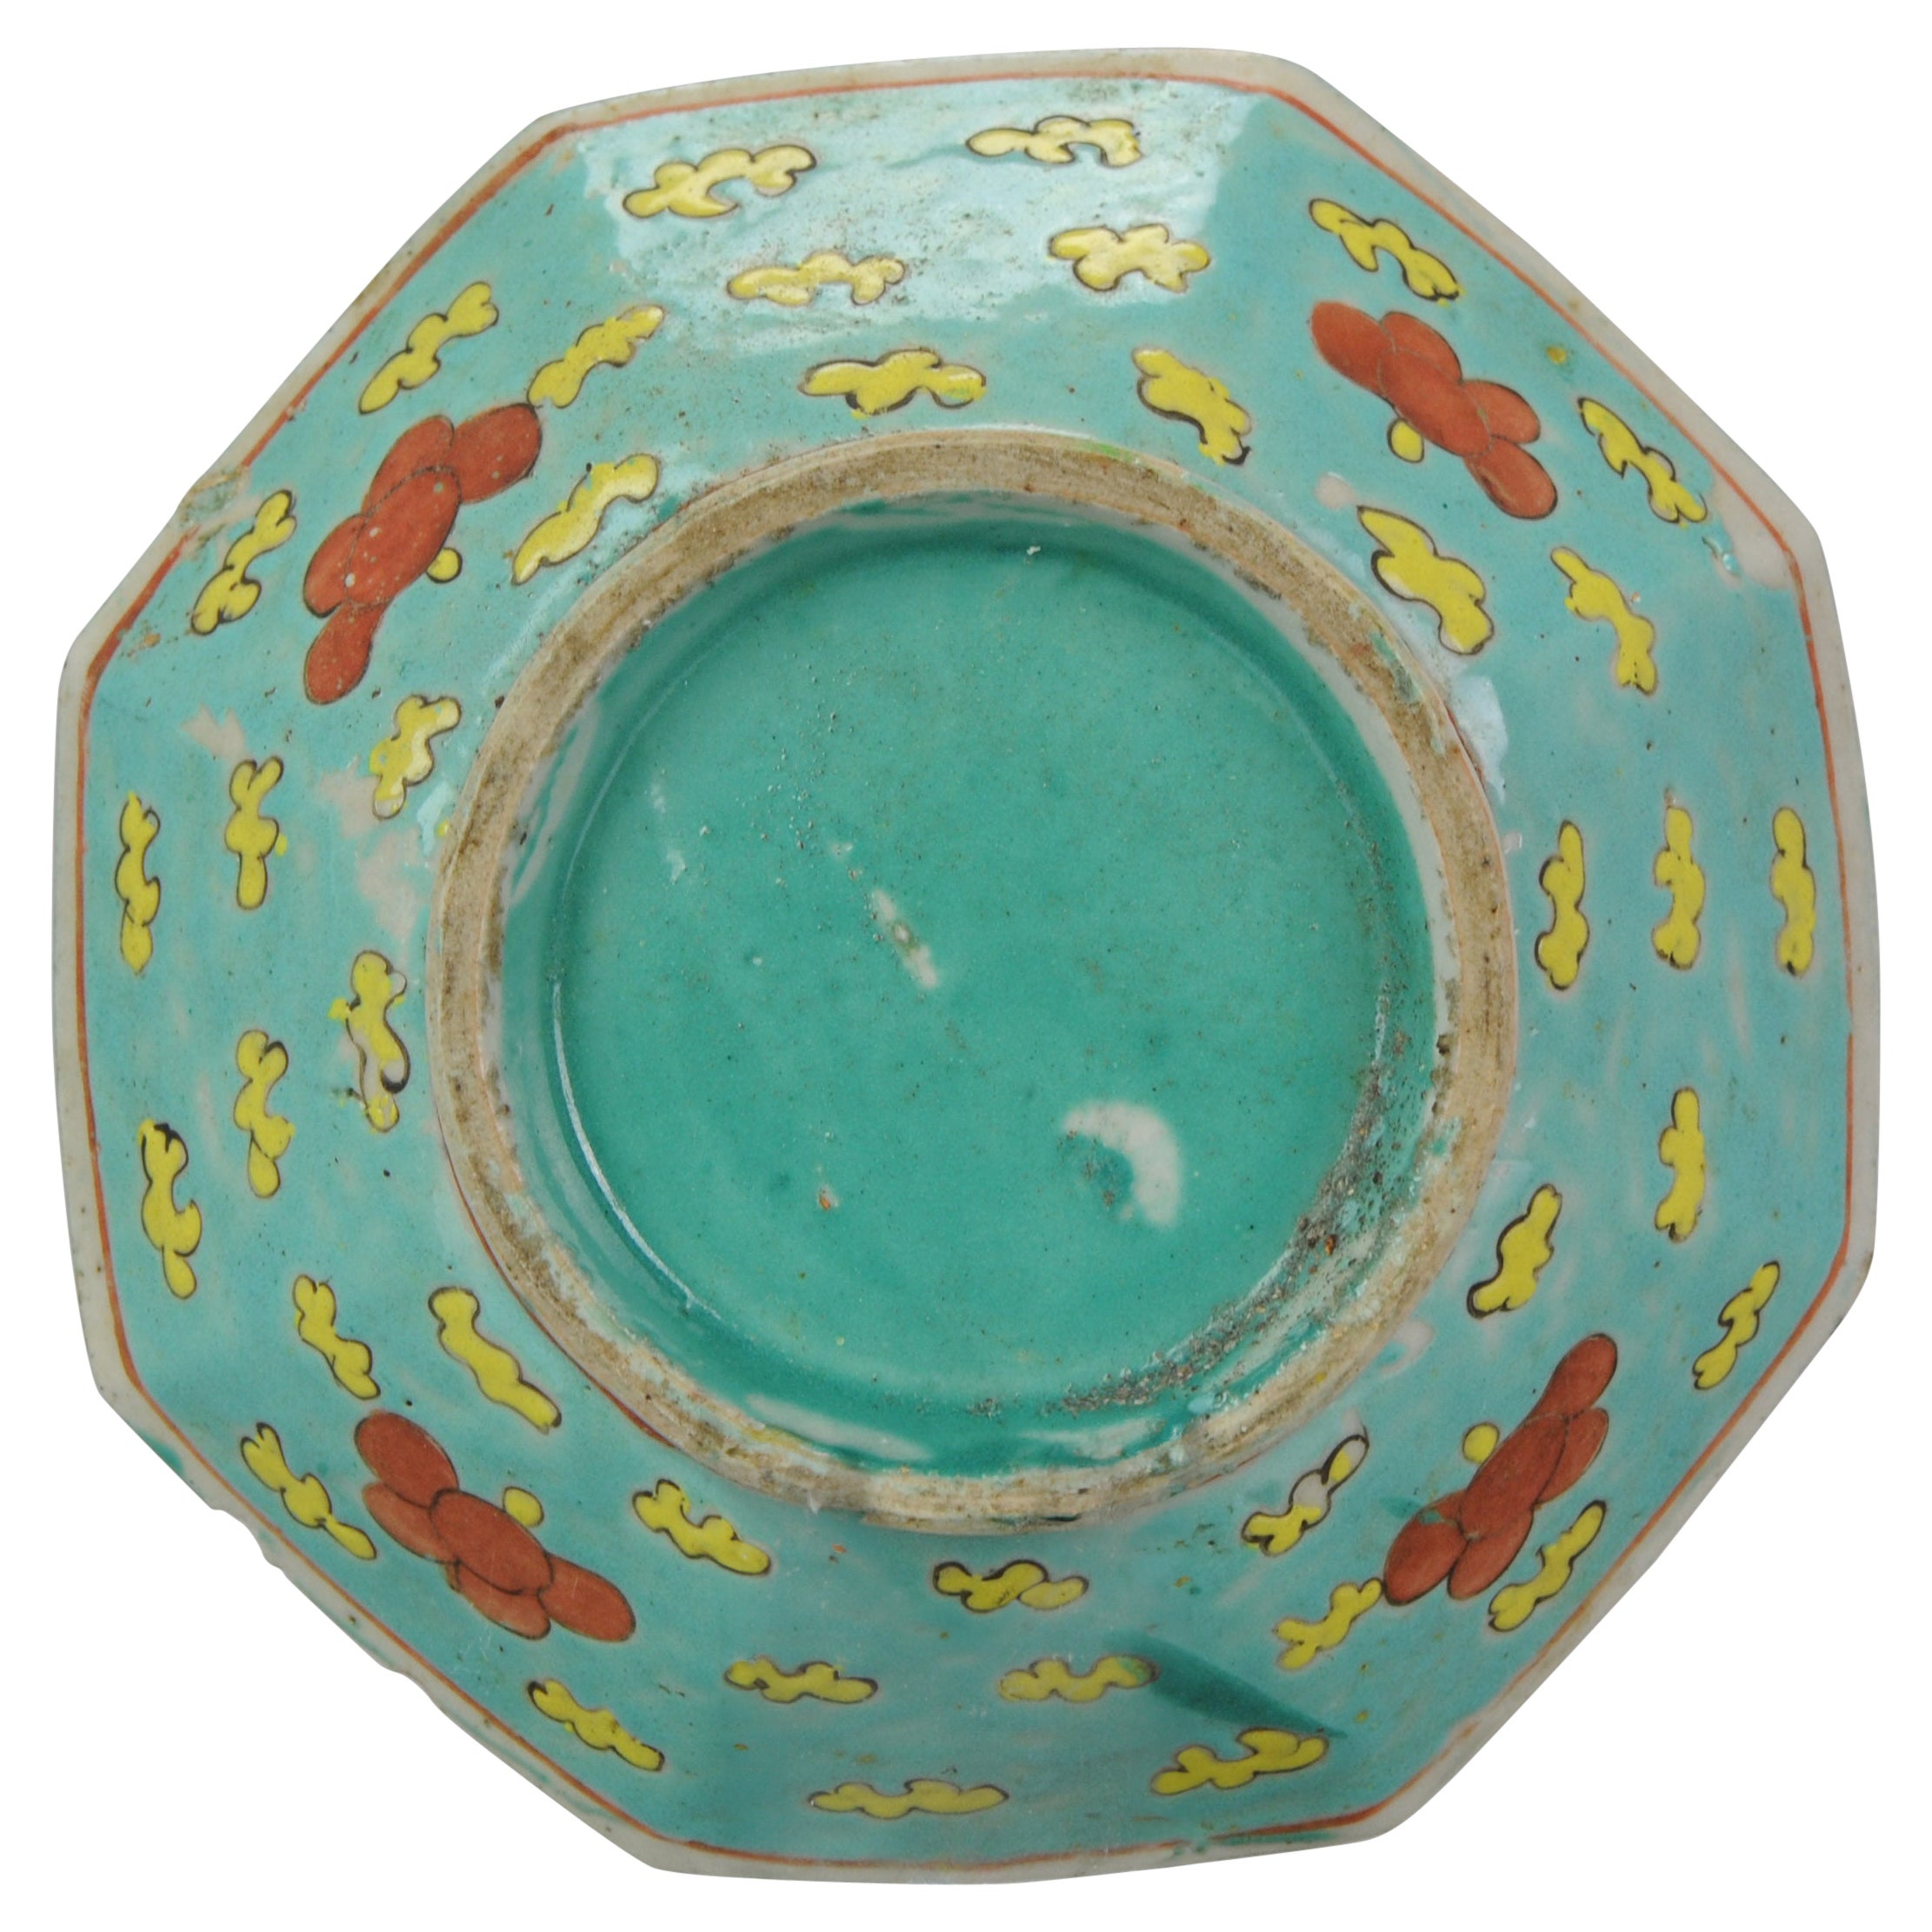 Antique Chinese Footed Bowl Turqoise Enamels China, 19th century